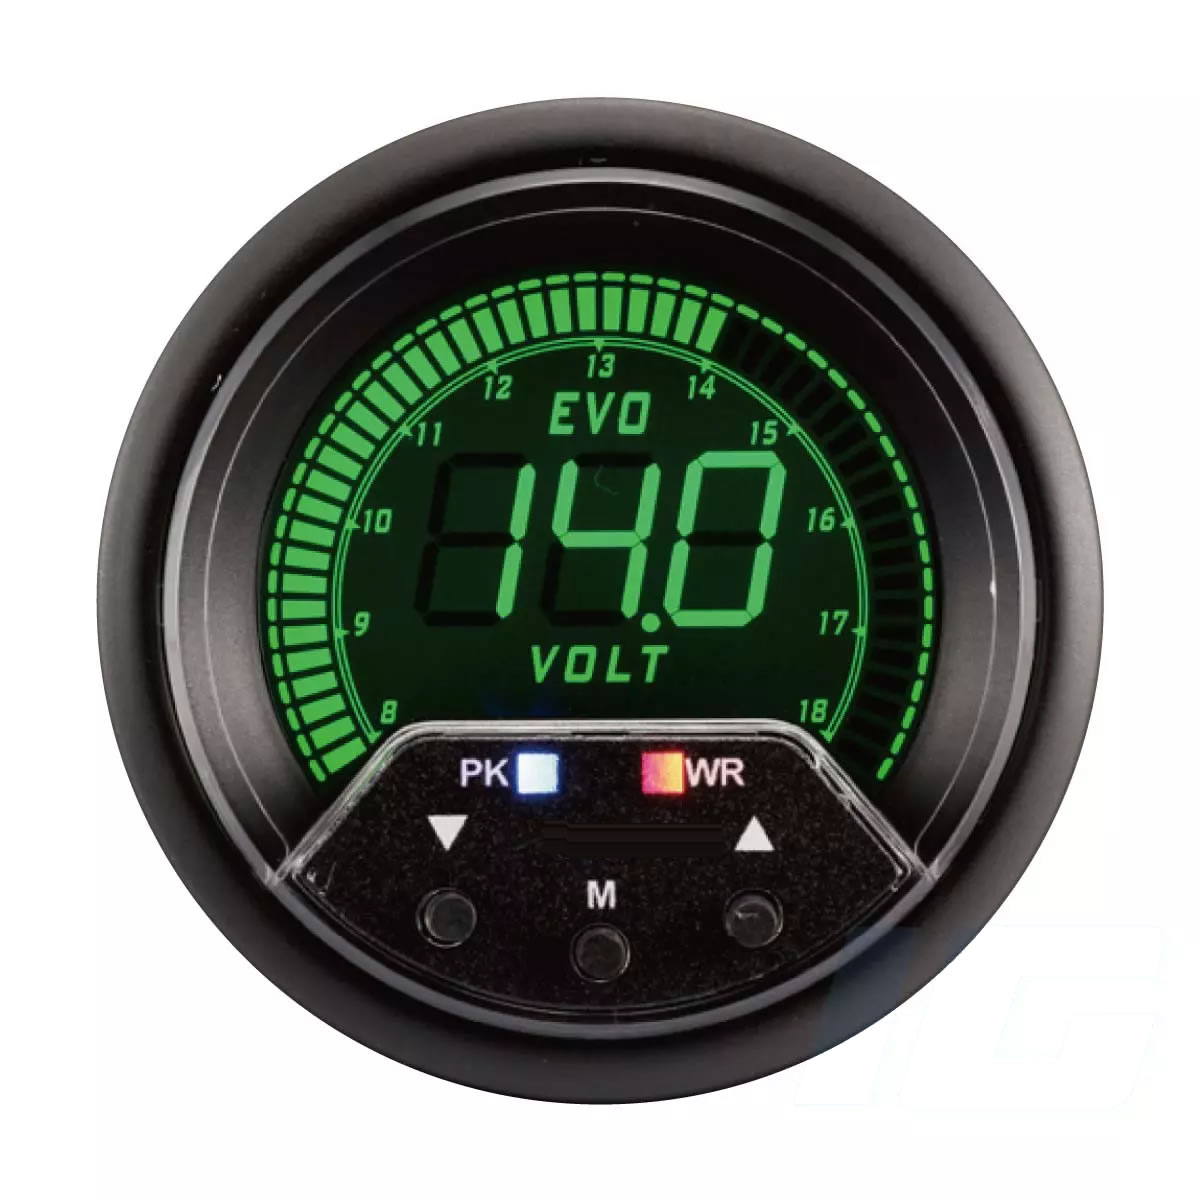 60mm LCD Performance Car Gauges - Volt Gauge With Warning and Peak For Your Sport Racing Car